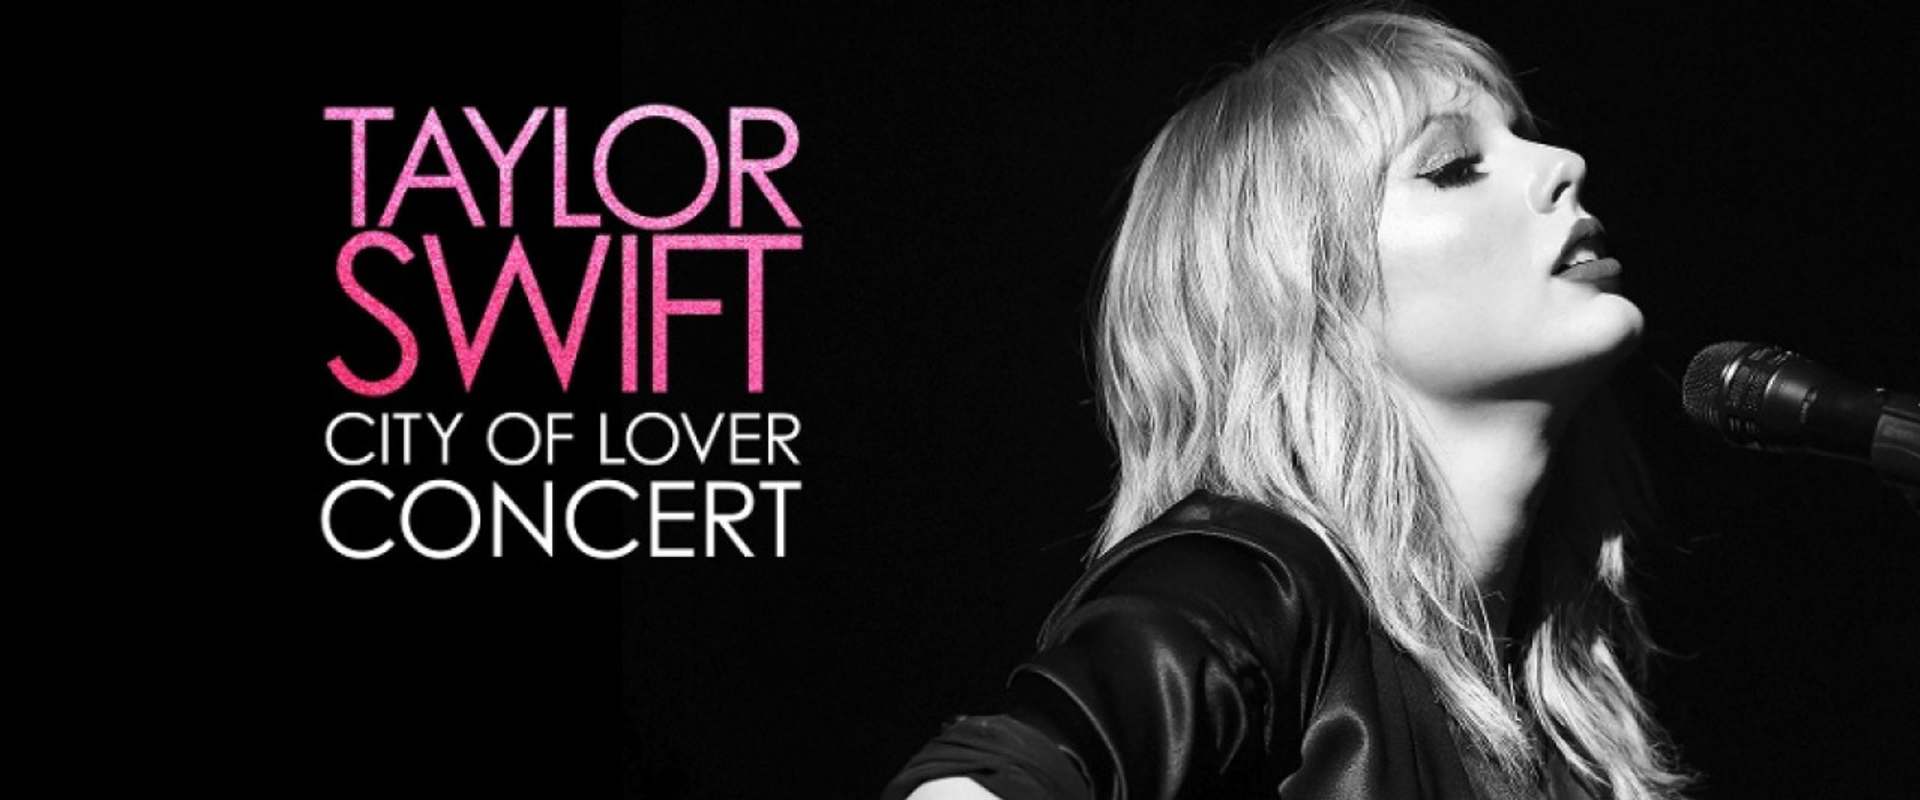 Taylor Swift City of Lover Concert background 2